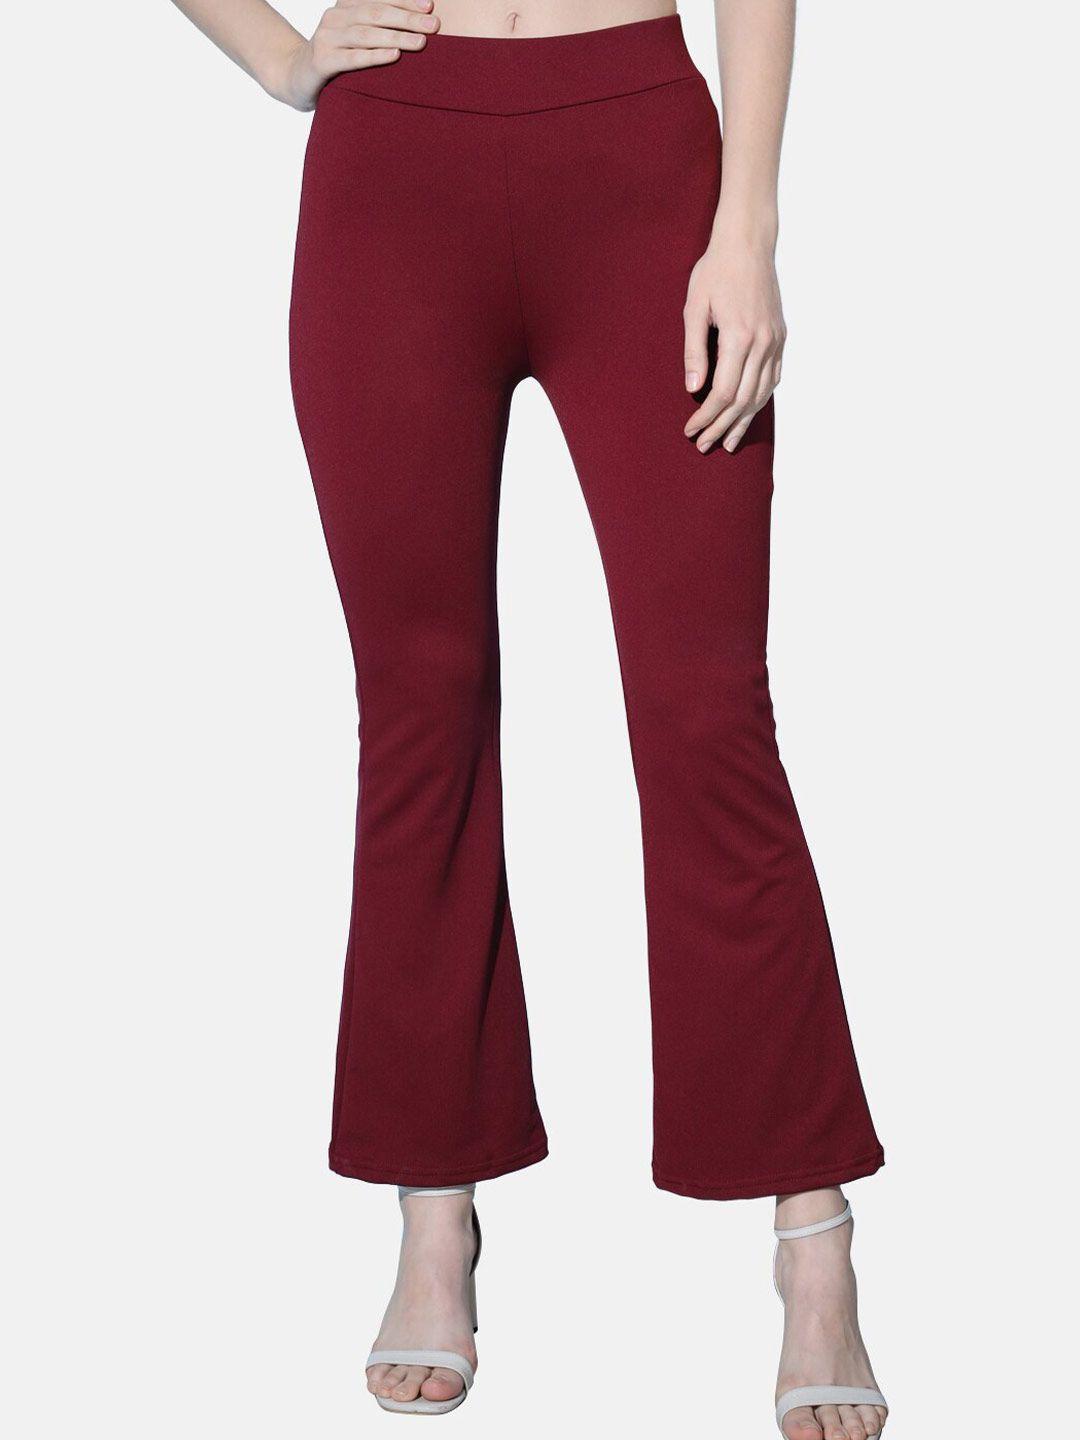 buy-new-trend-women-slim-fit-high-rise-trousers